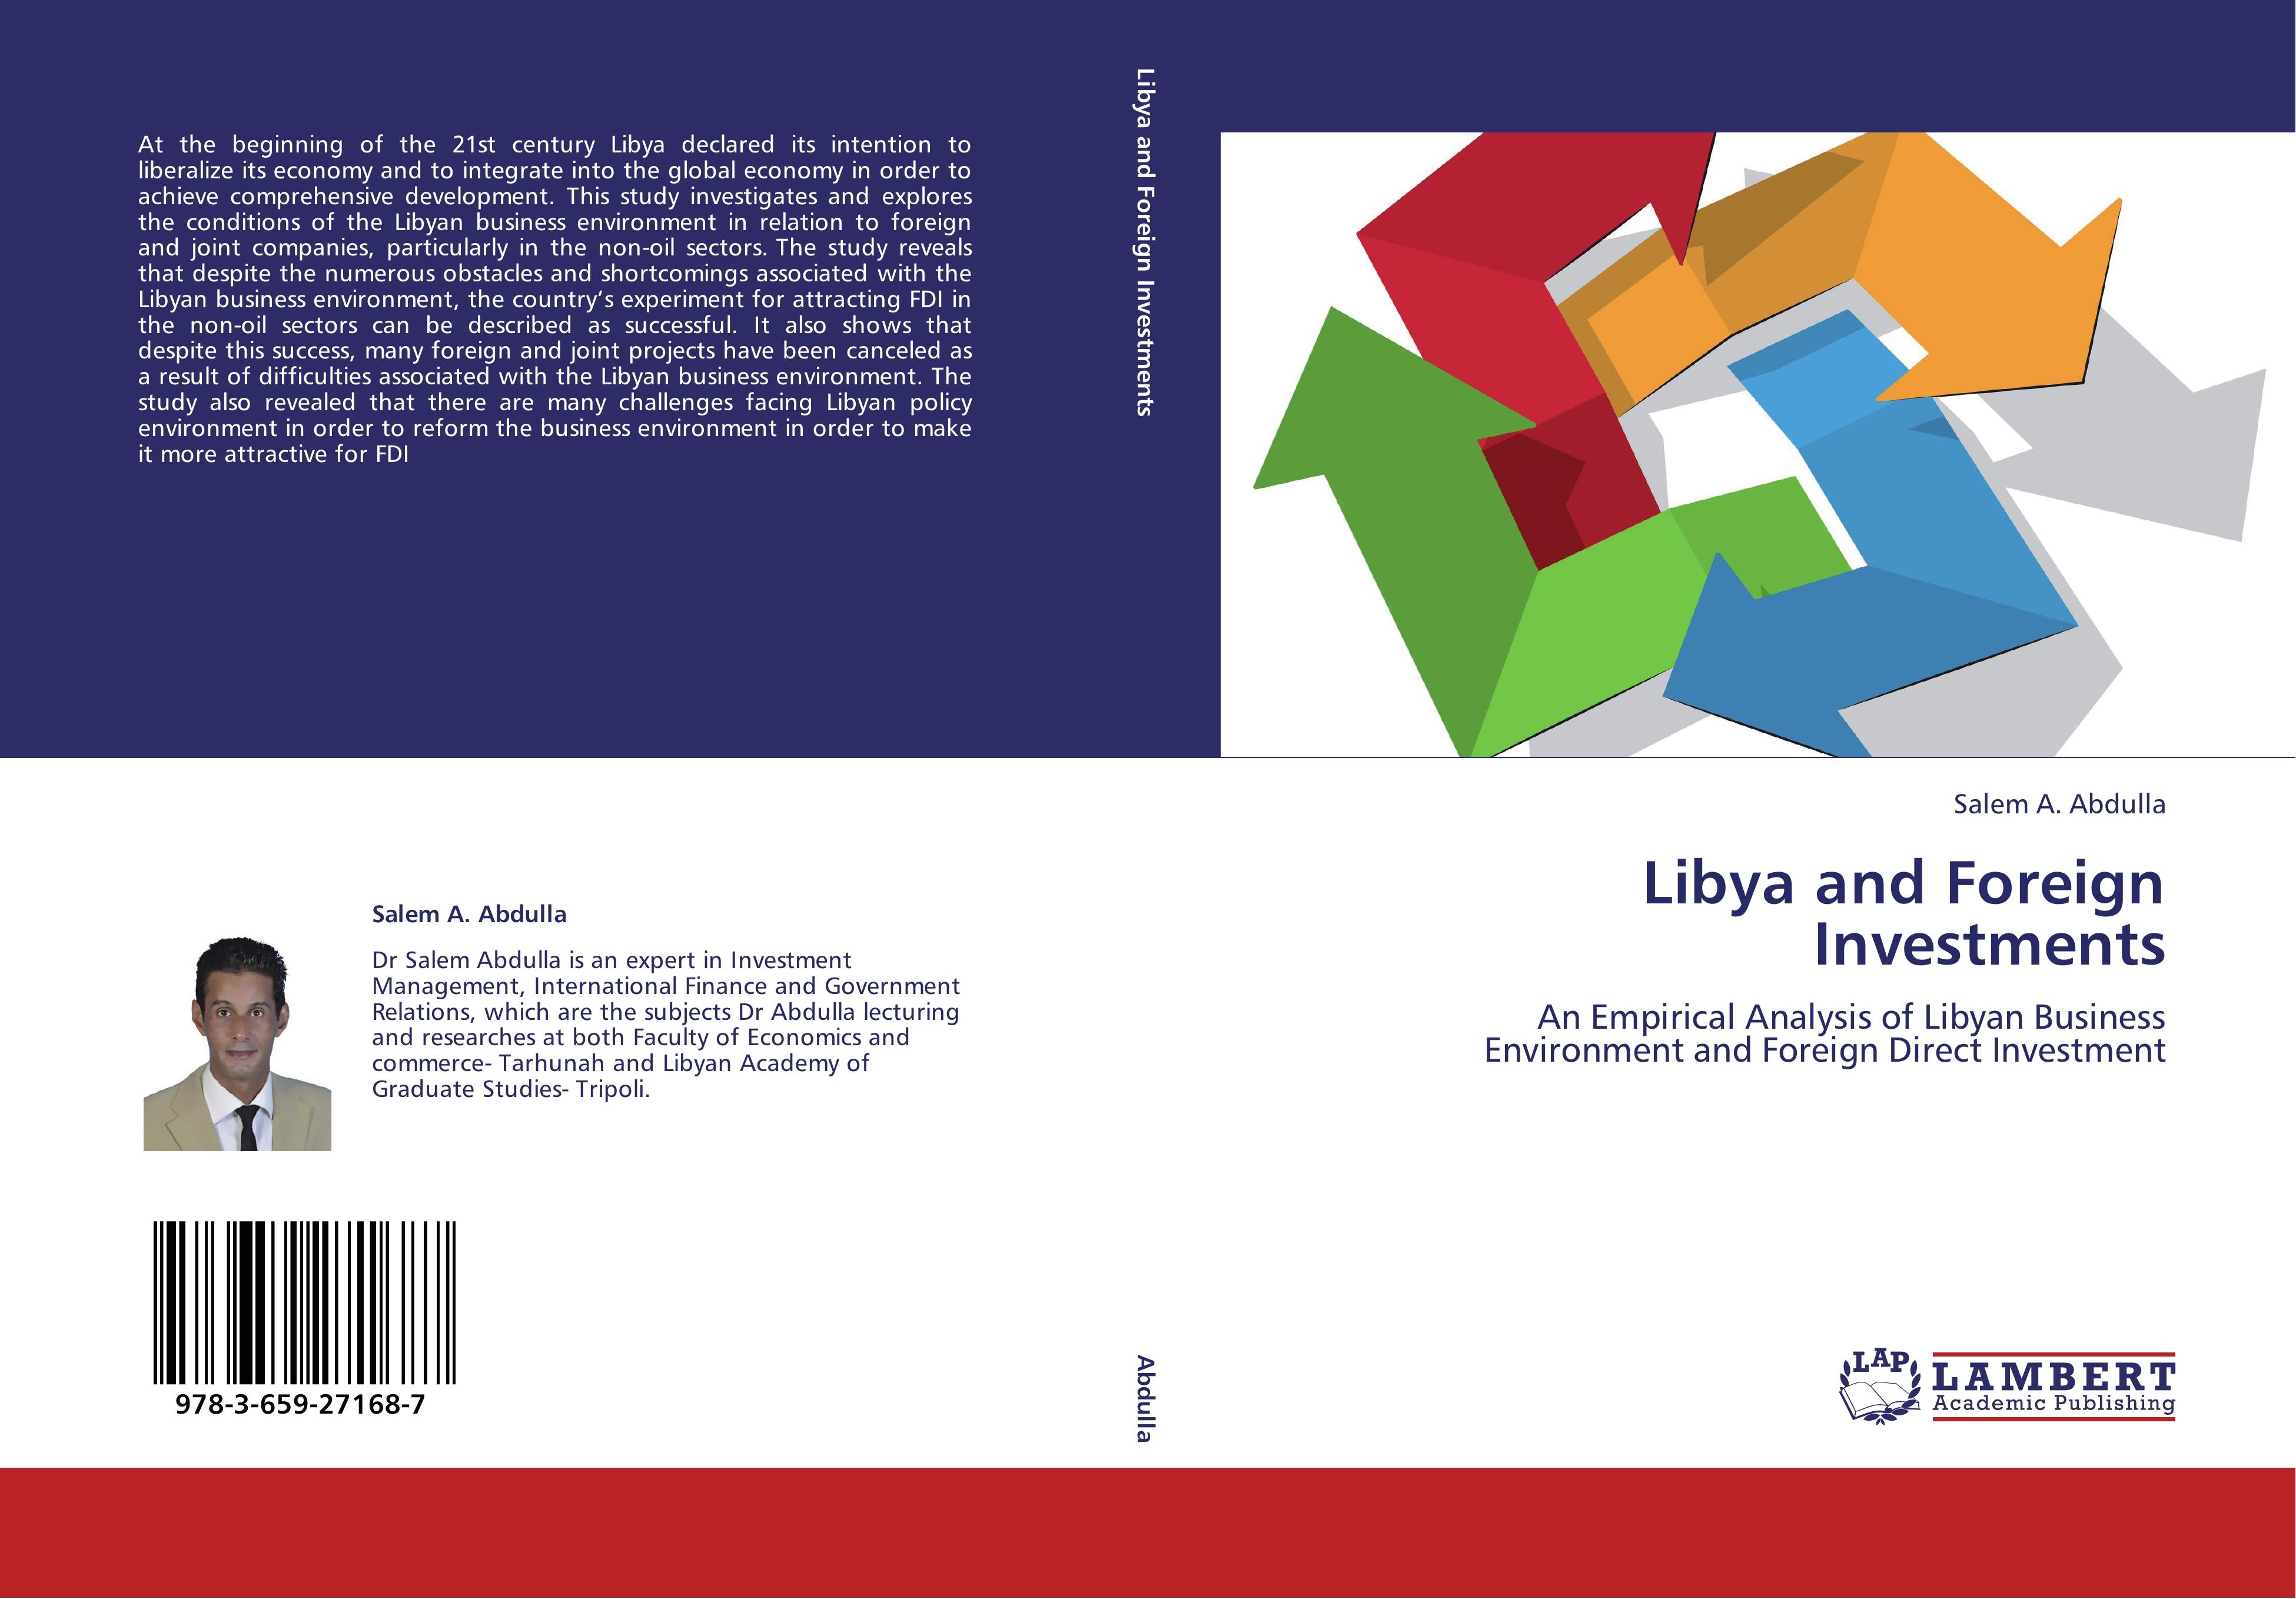 Libya and Foreign Investments / An Empirical Analysis of Libyan Business Environment and Foreign Direct Investment / Salem A. Abdulla / Taschenbuch / Paperback / 340 S. / Englisch / 2012 - Abdulla, Salem A.